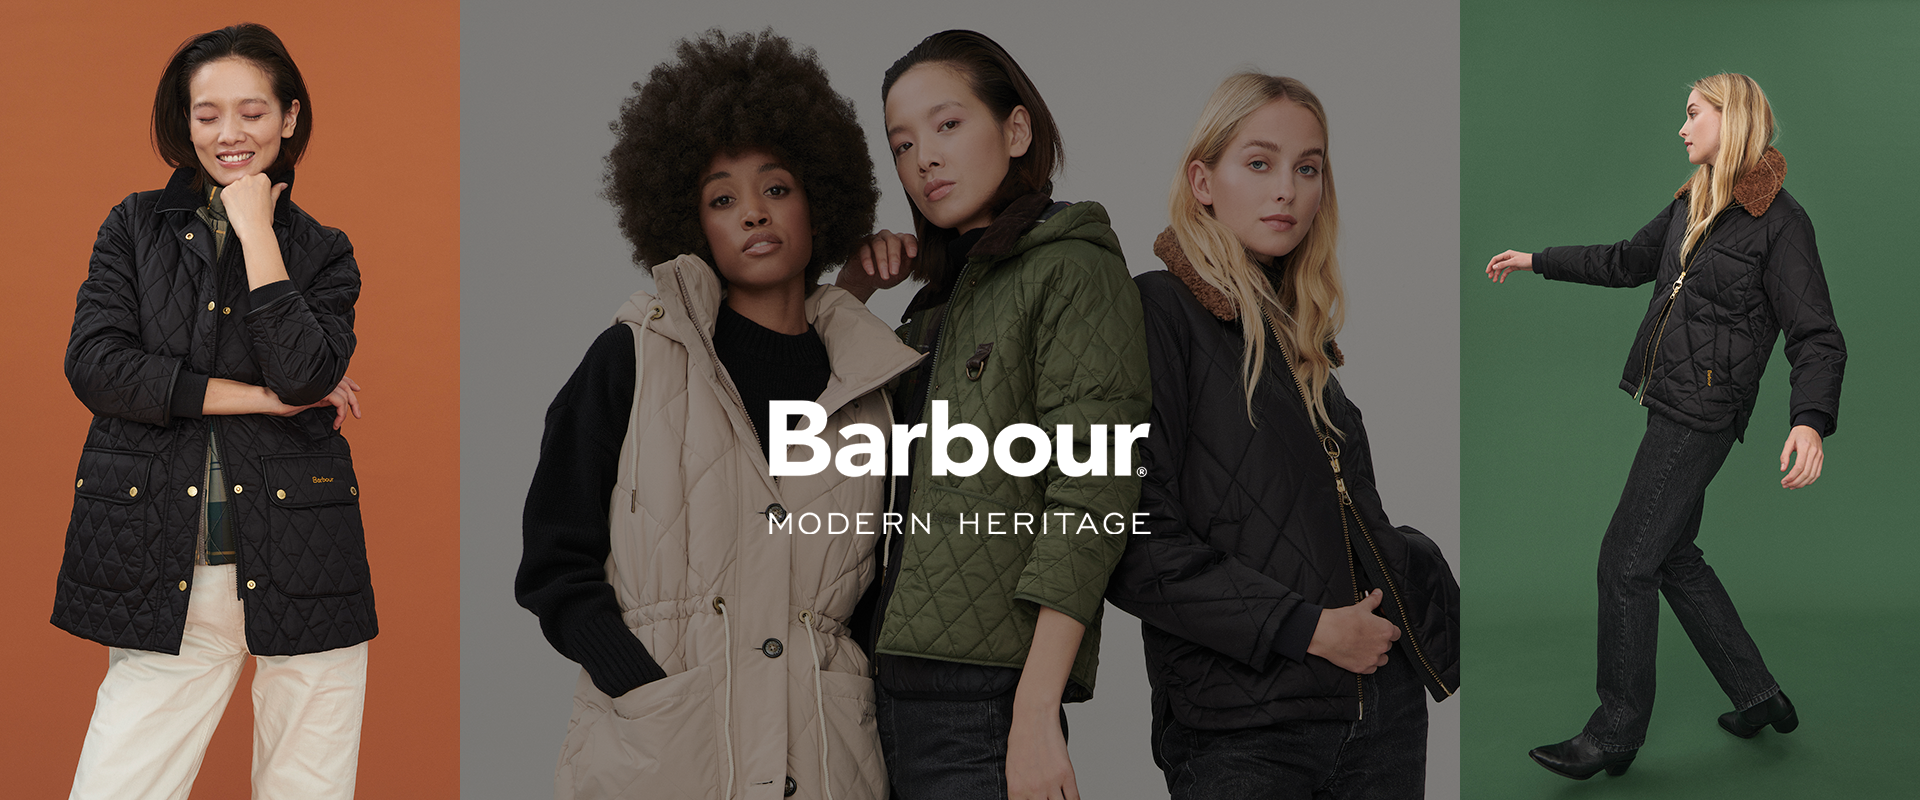 Modern Heritage the Women's Collection | Barbour